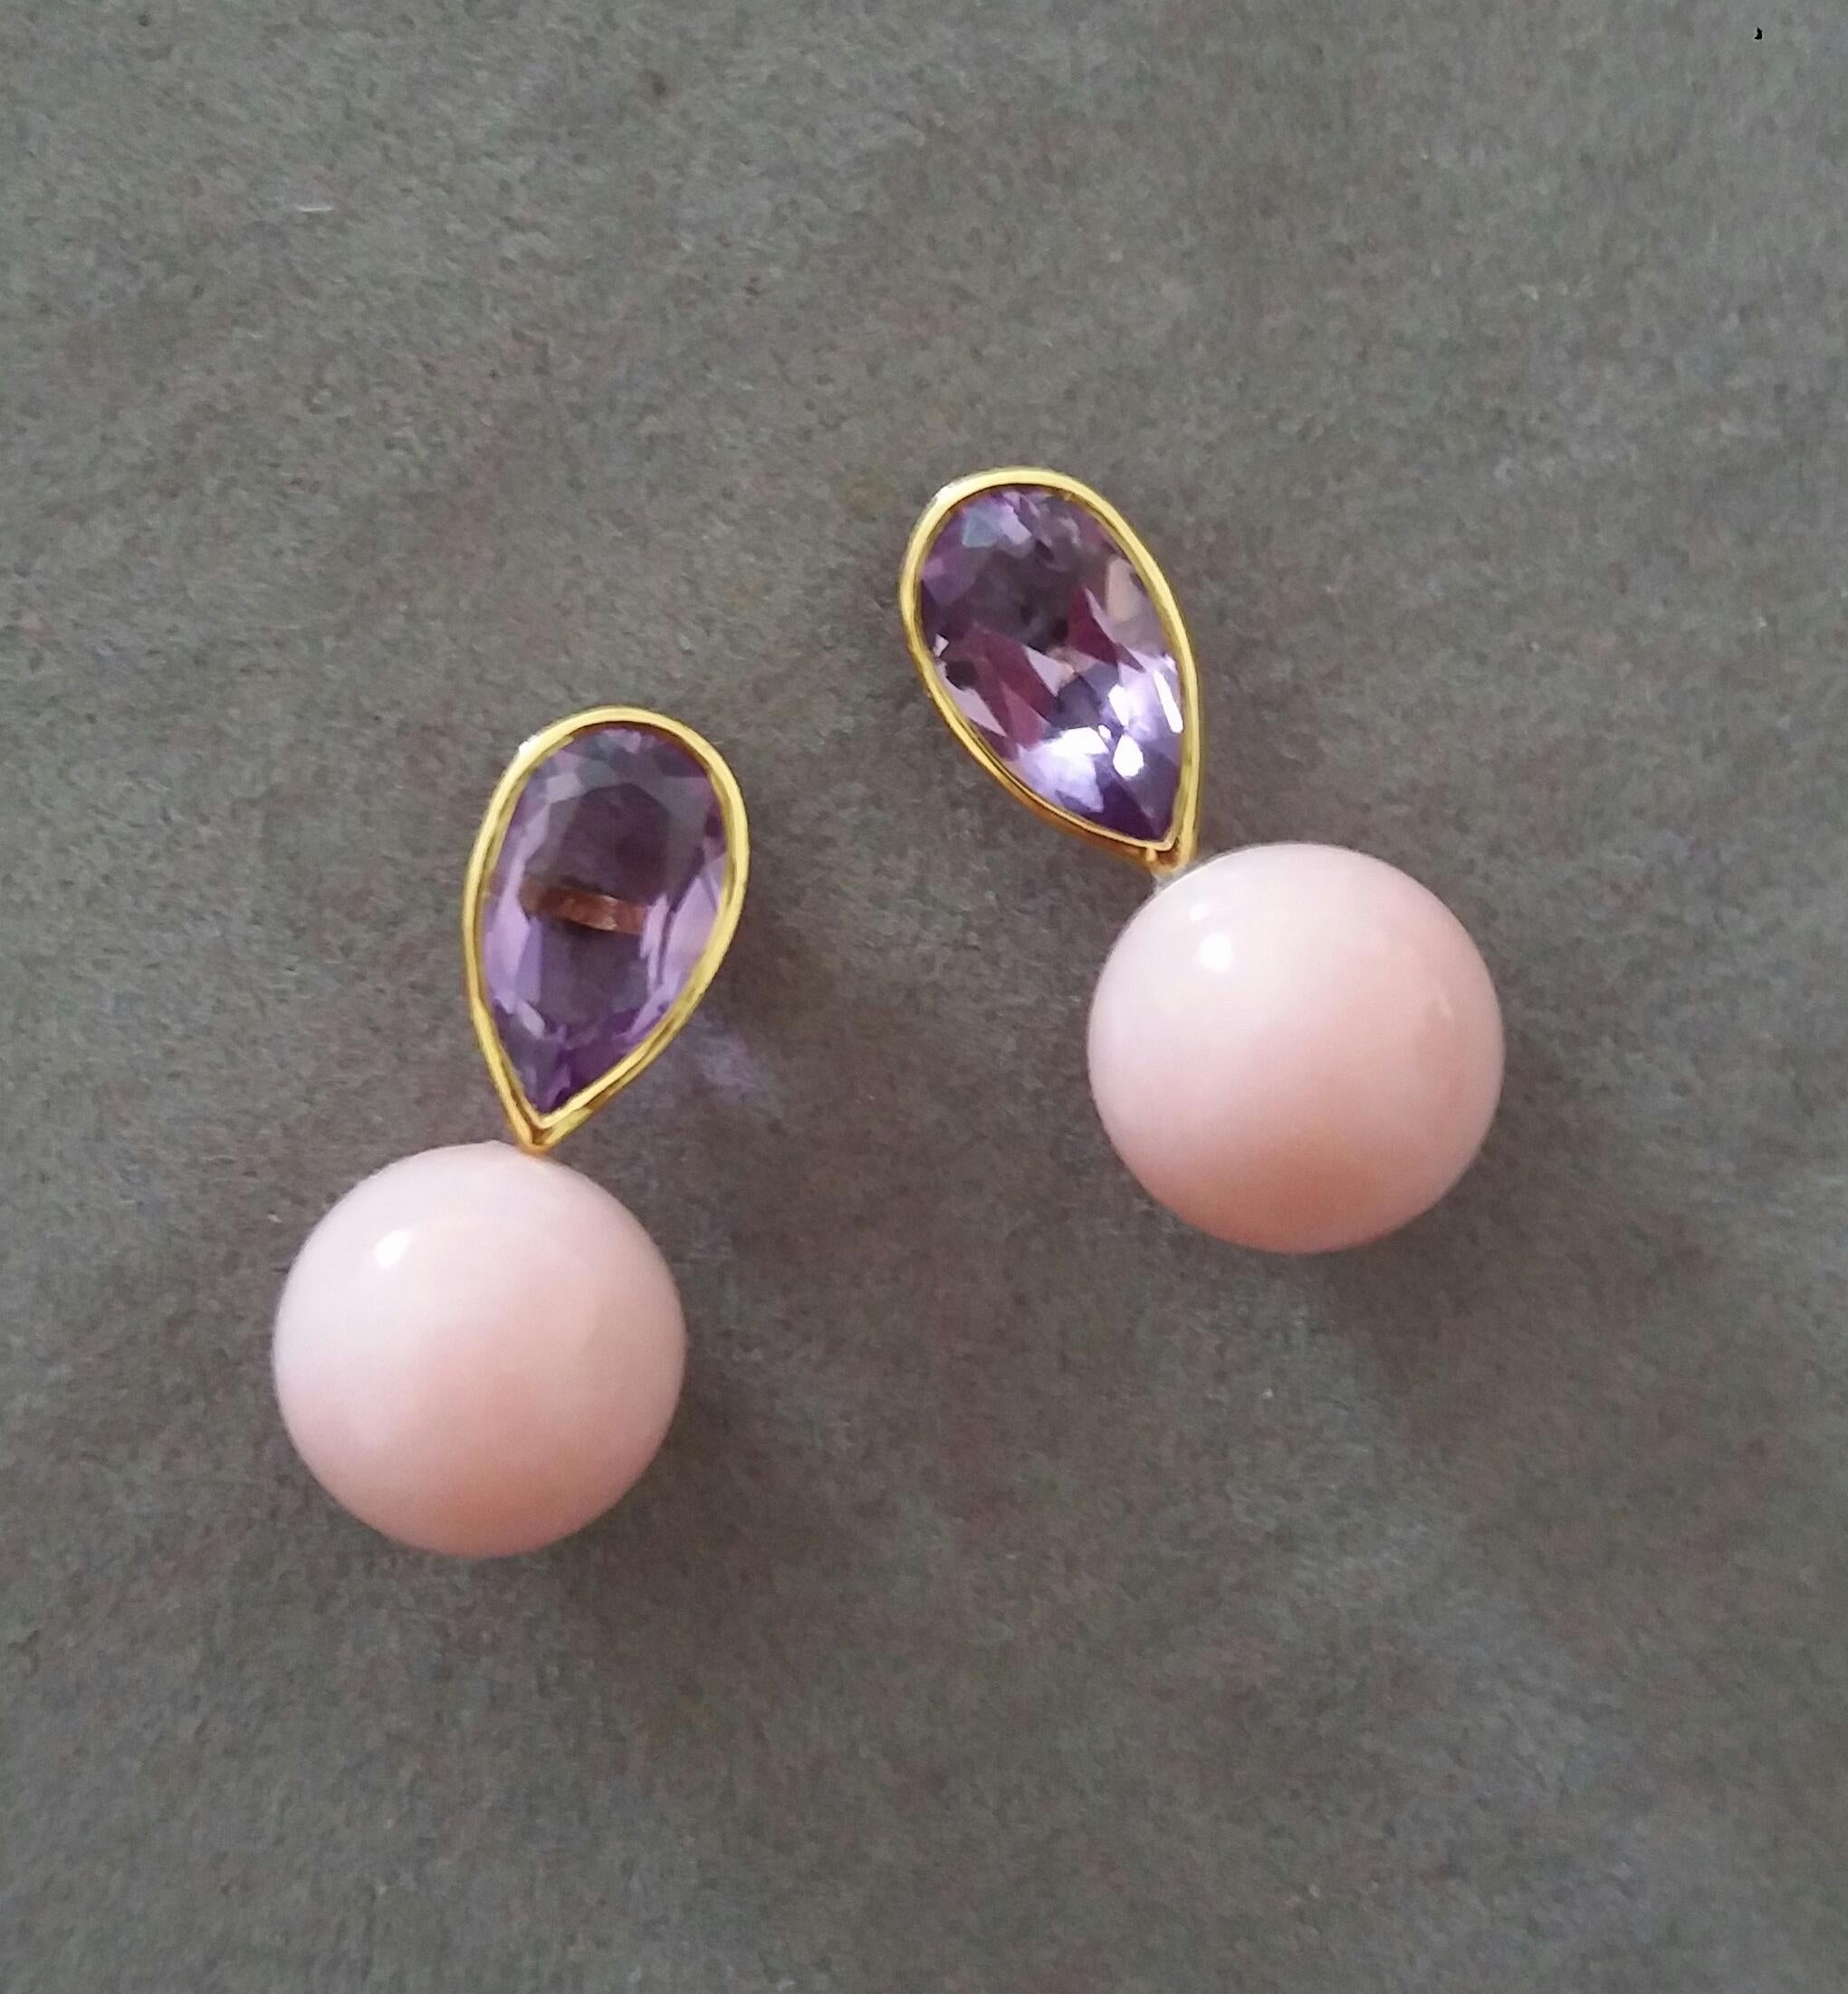 Contemporary 4.55 Carat Pear Shape Amethysts Gold Bezel Pink Opal Round Beads Stud Earrings For Sale